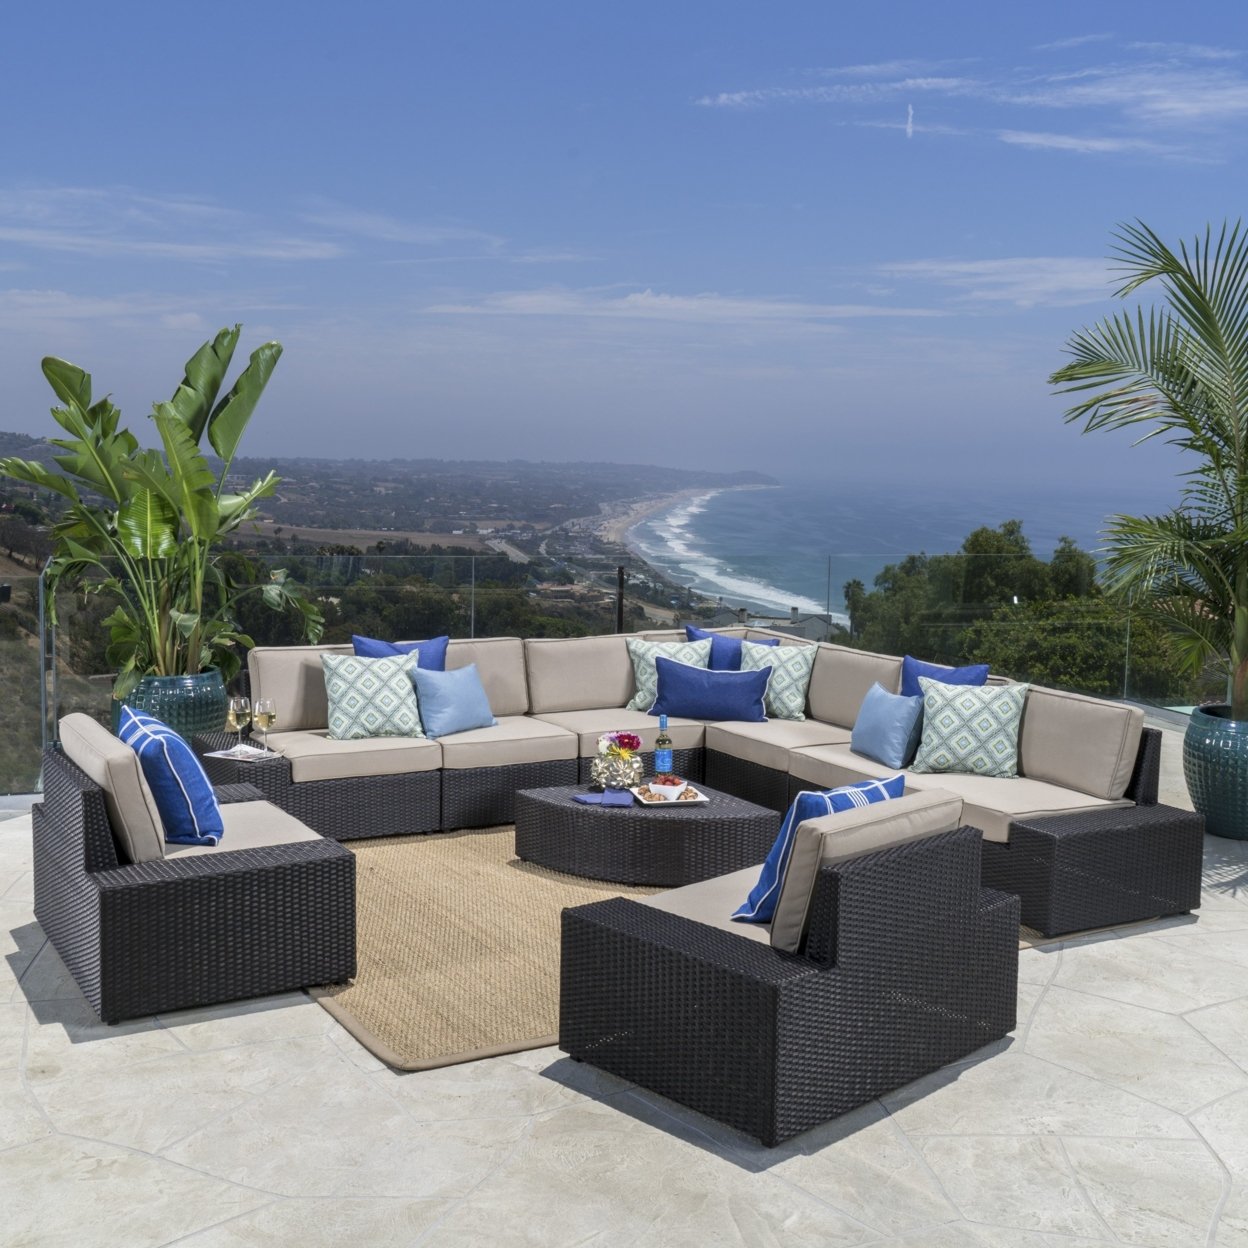 Reddington Outdoor Wicker Sectional Set With Cushions - Gray / White, 8-Piece Set